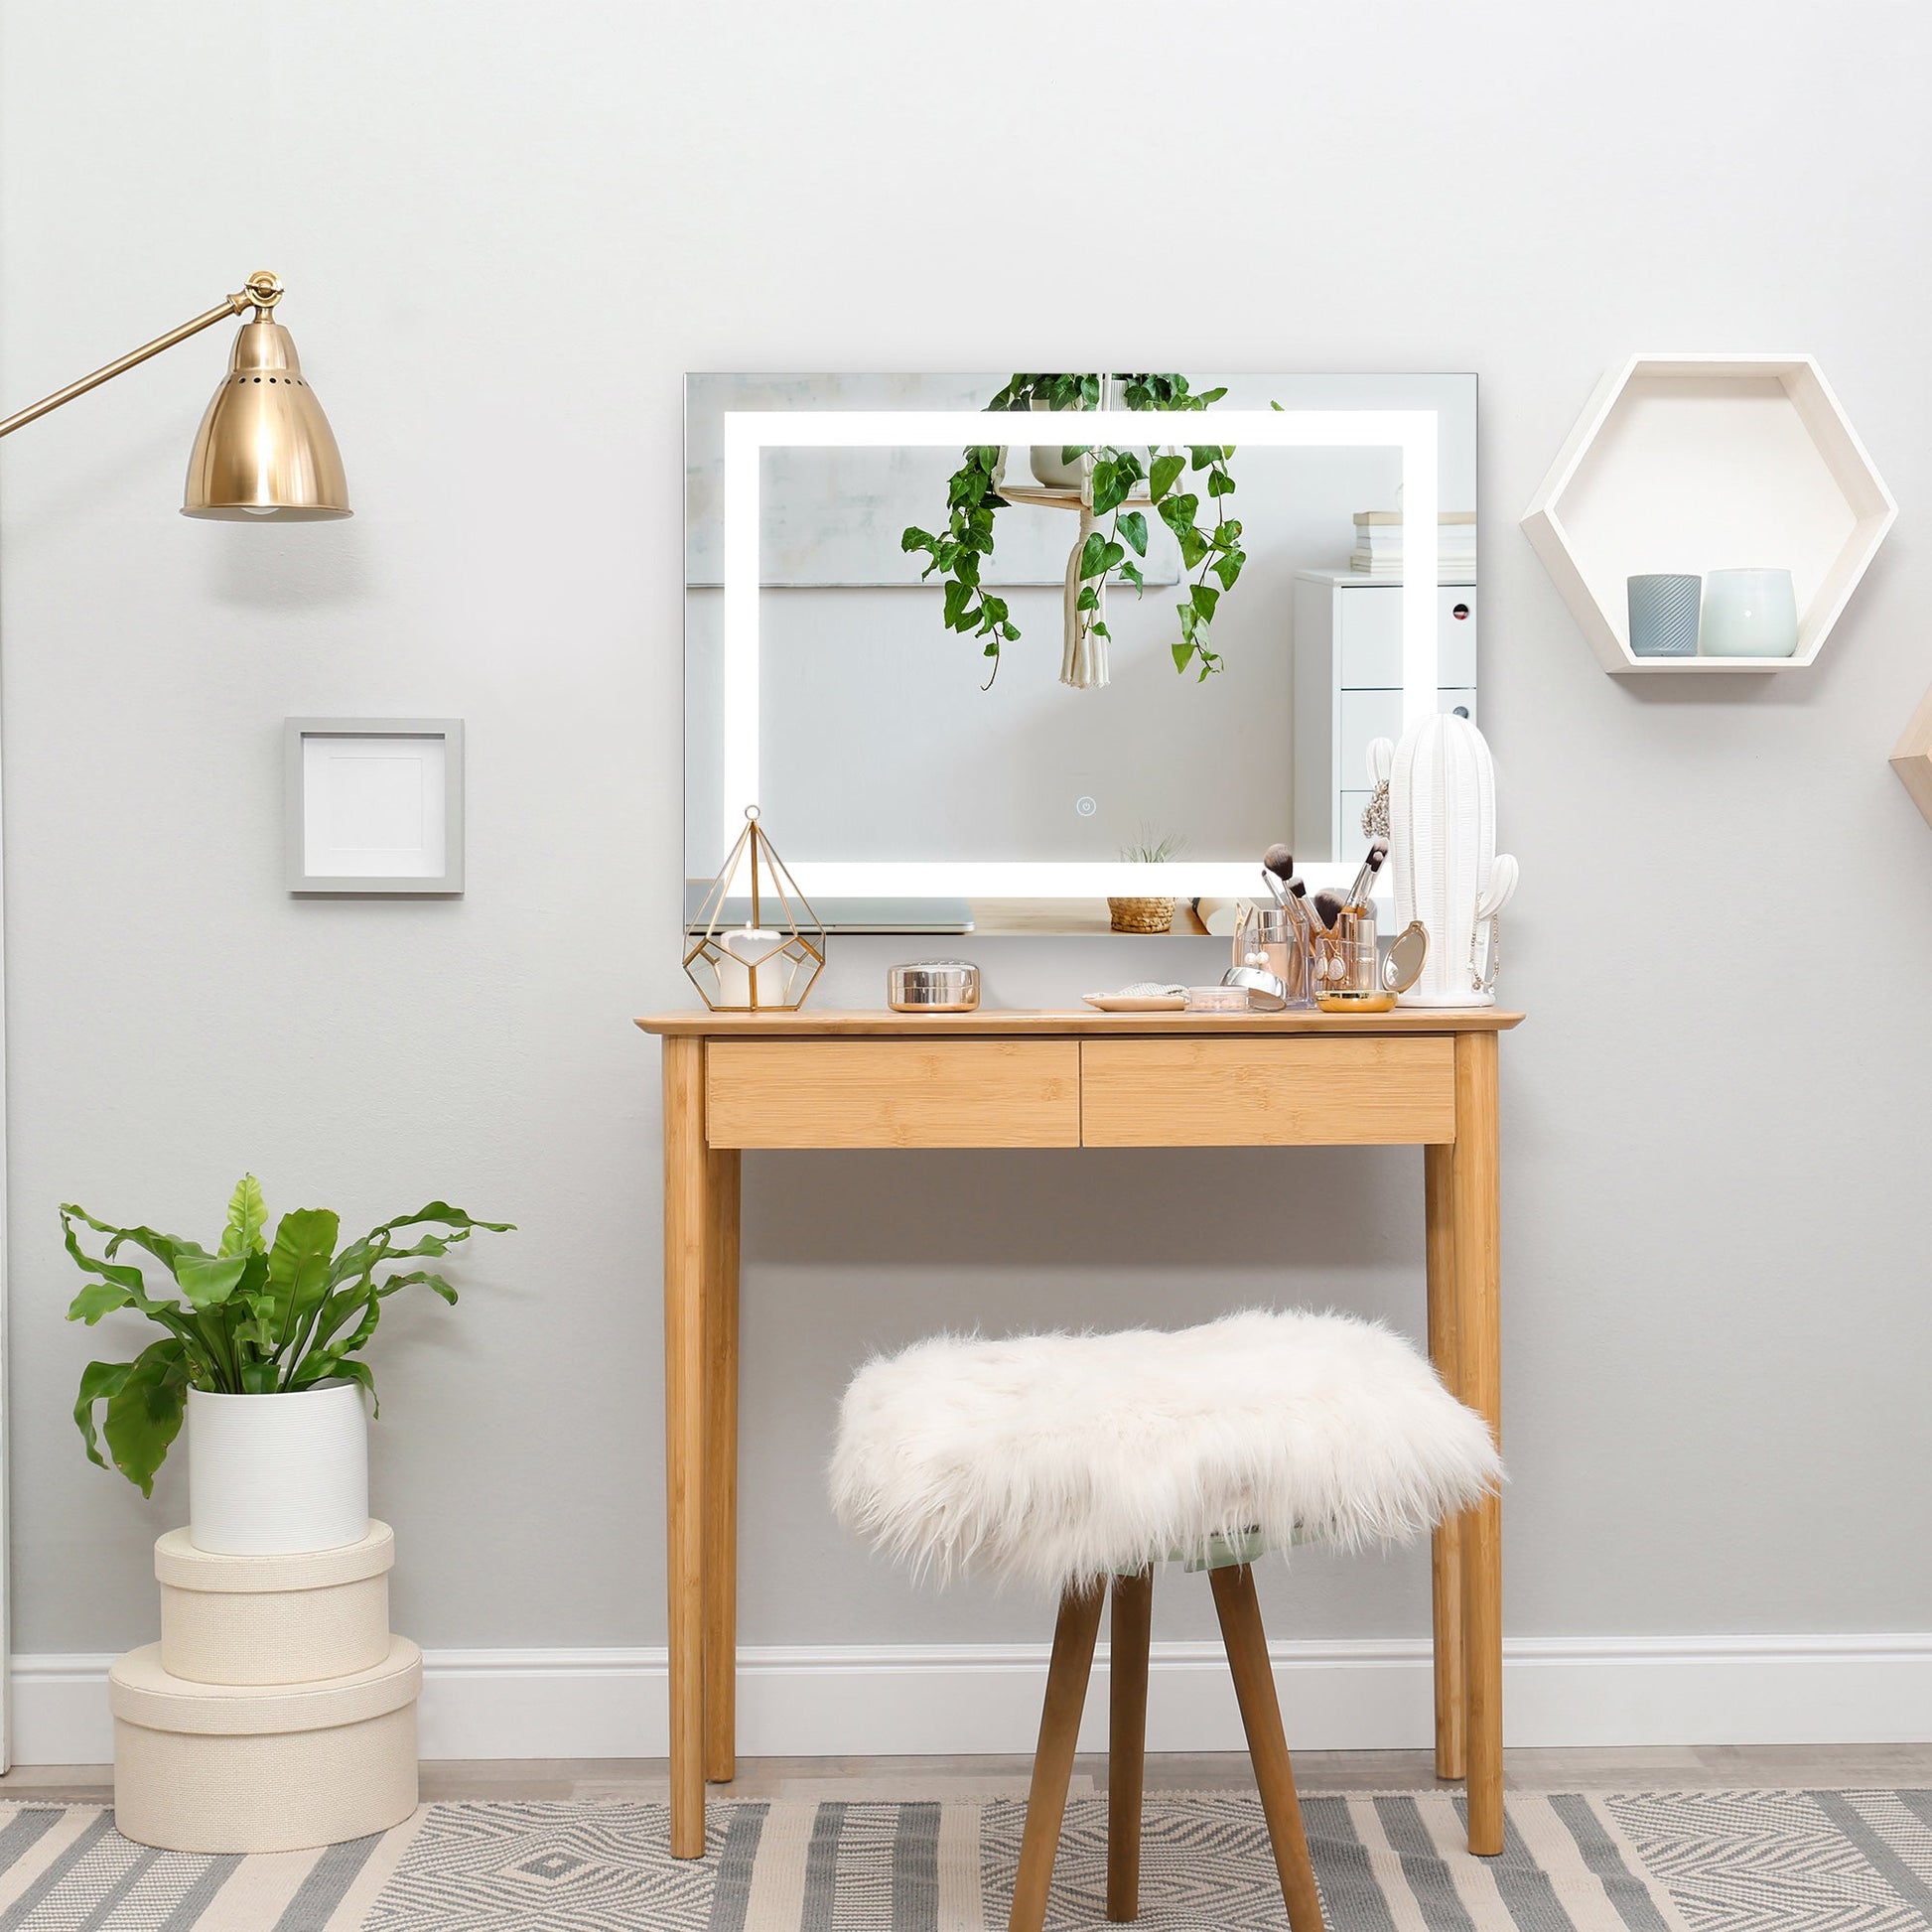 24 x 32 Inch LED Bathroom Mirror Wall Mounted Vanity Lighted Illuminated Mirror with with Touch Switch, Vertical Outline LEDs Wall Mirrors   at Gallery Canada